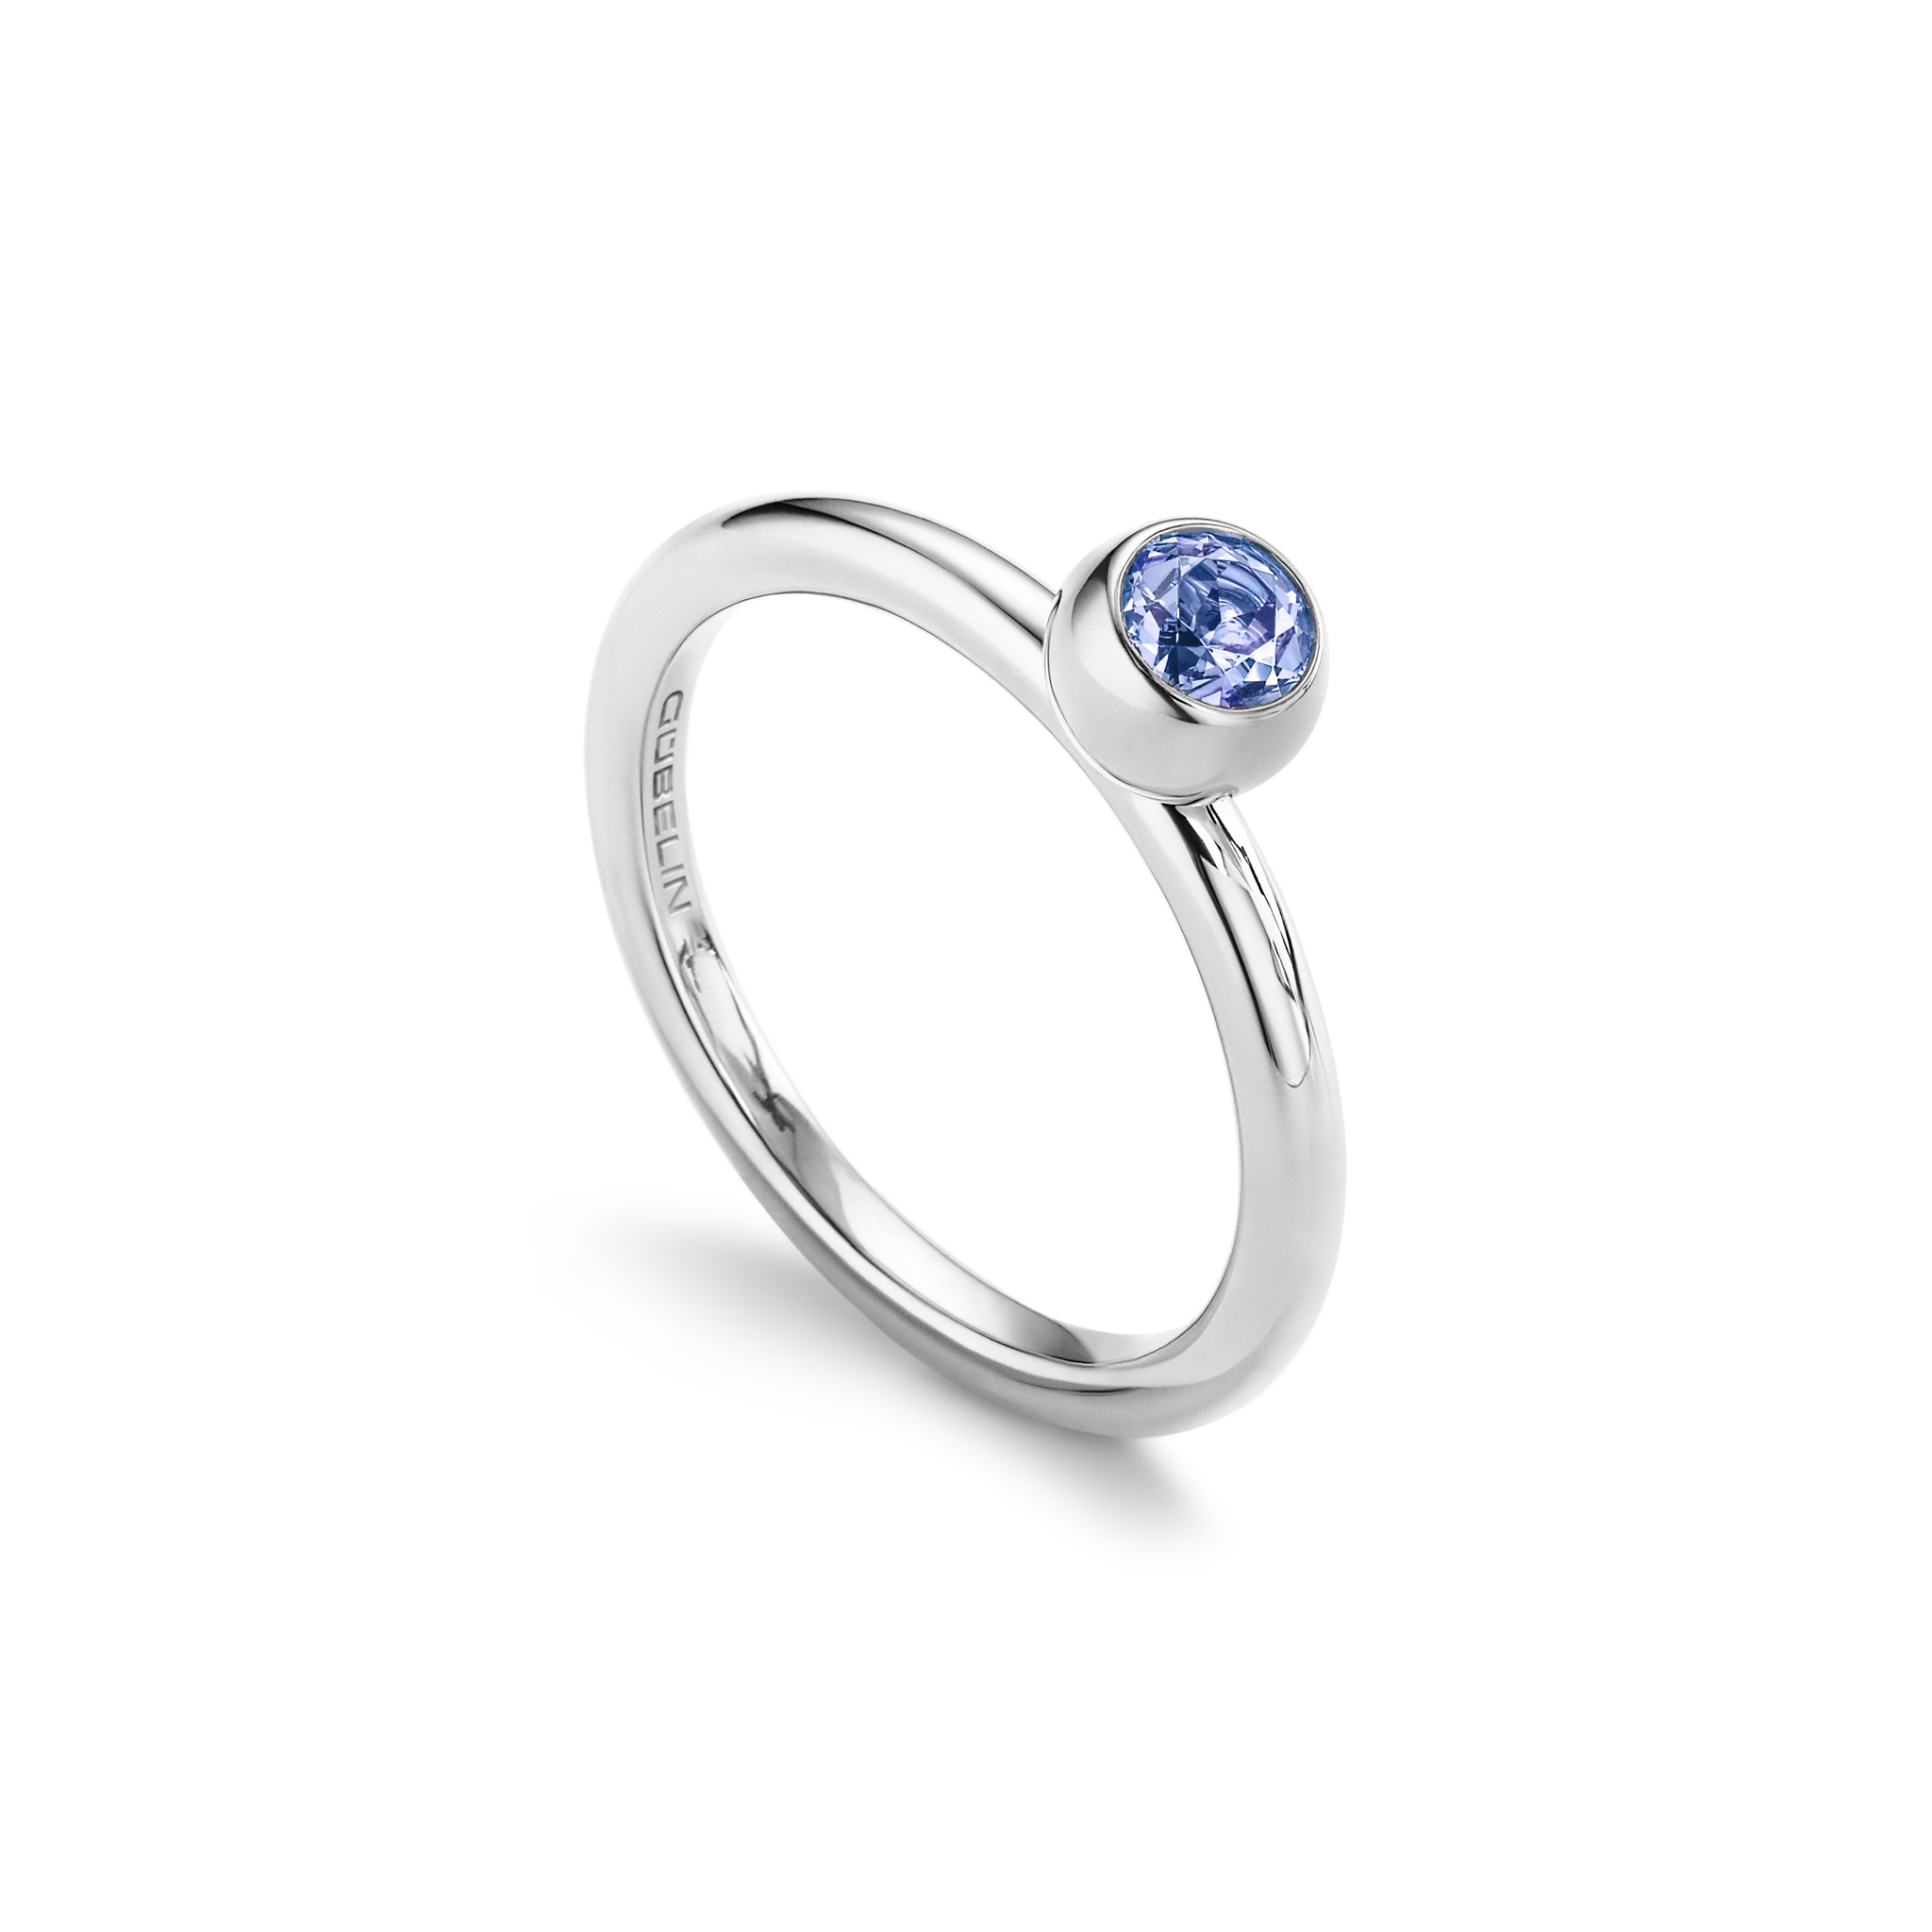 Ring with tanzanite